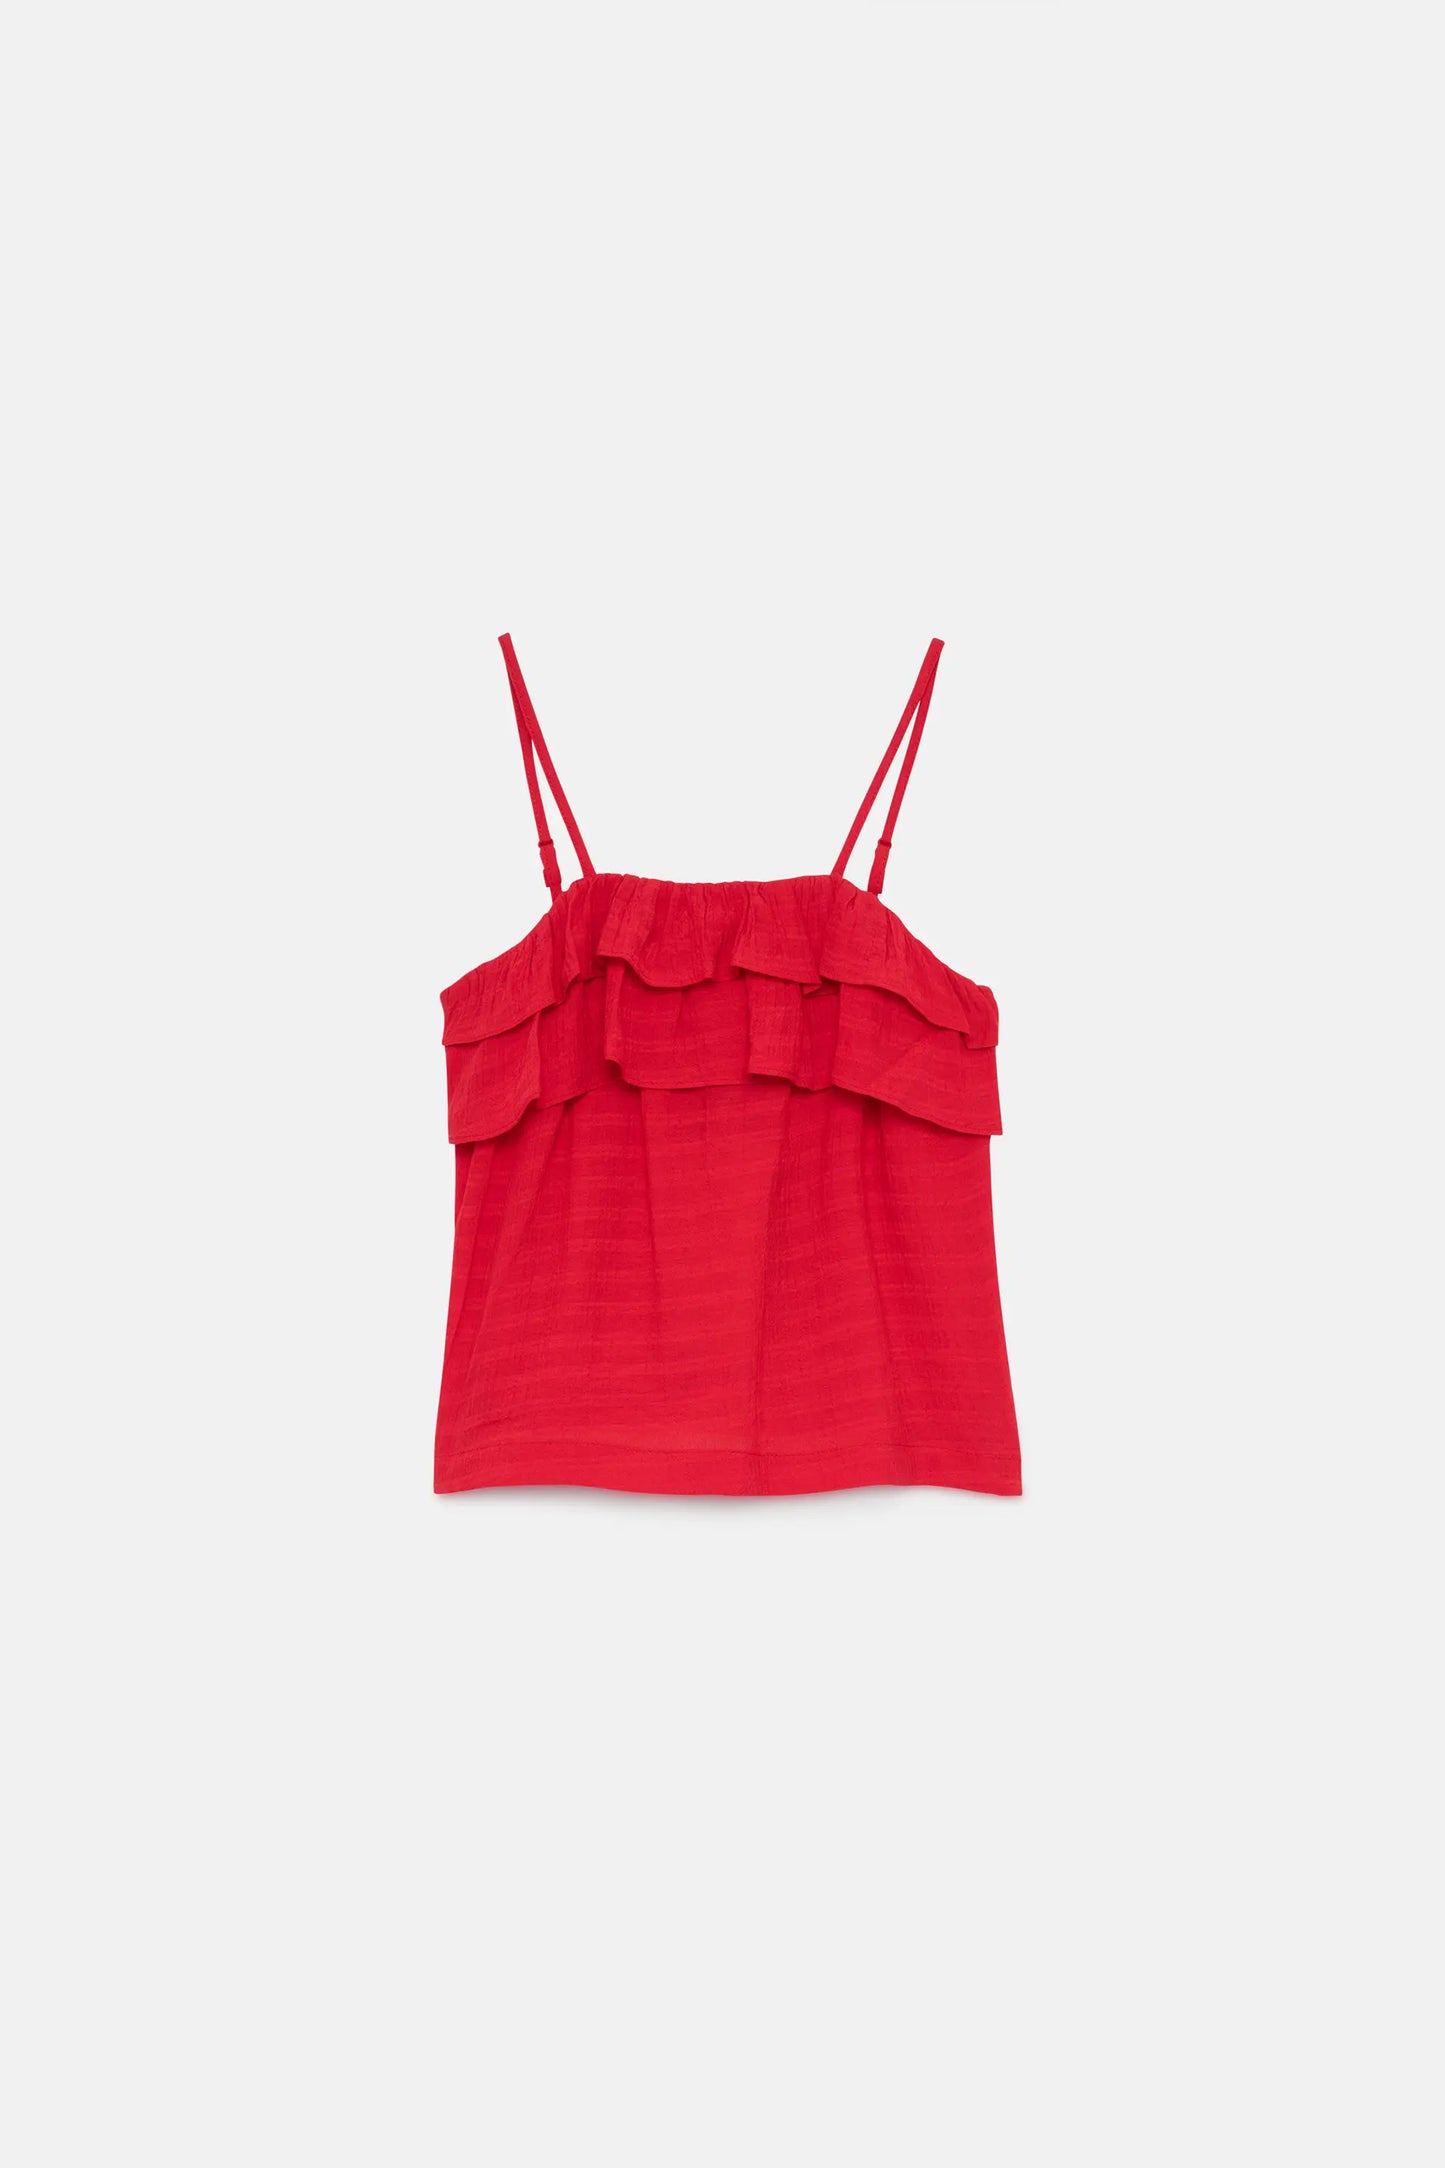 Girl's red strapless top